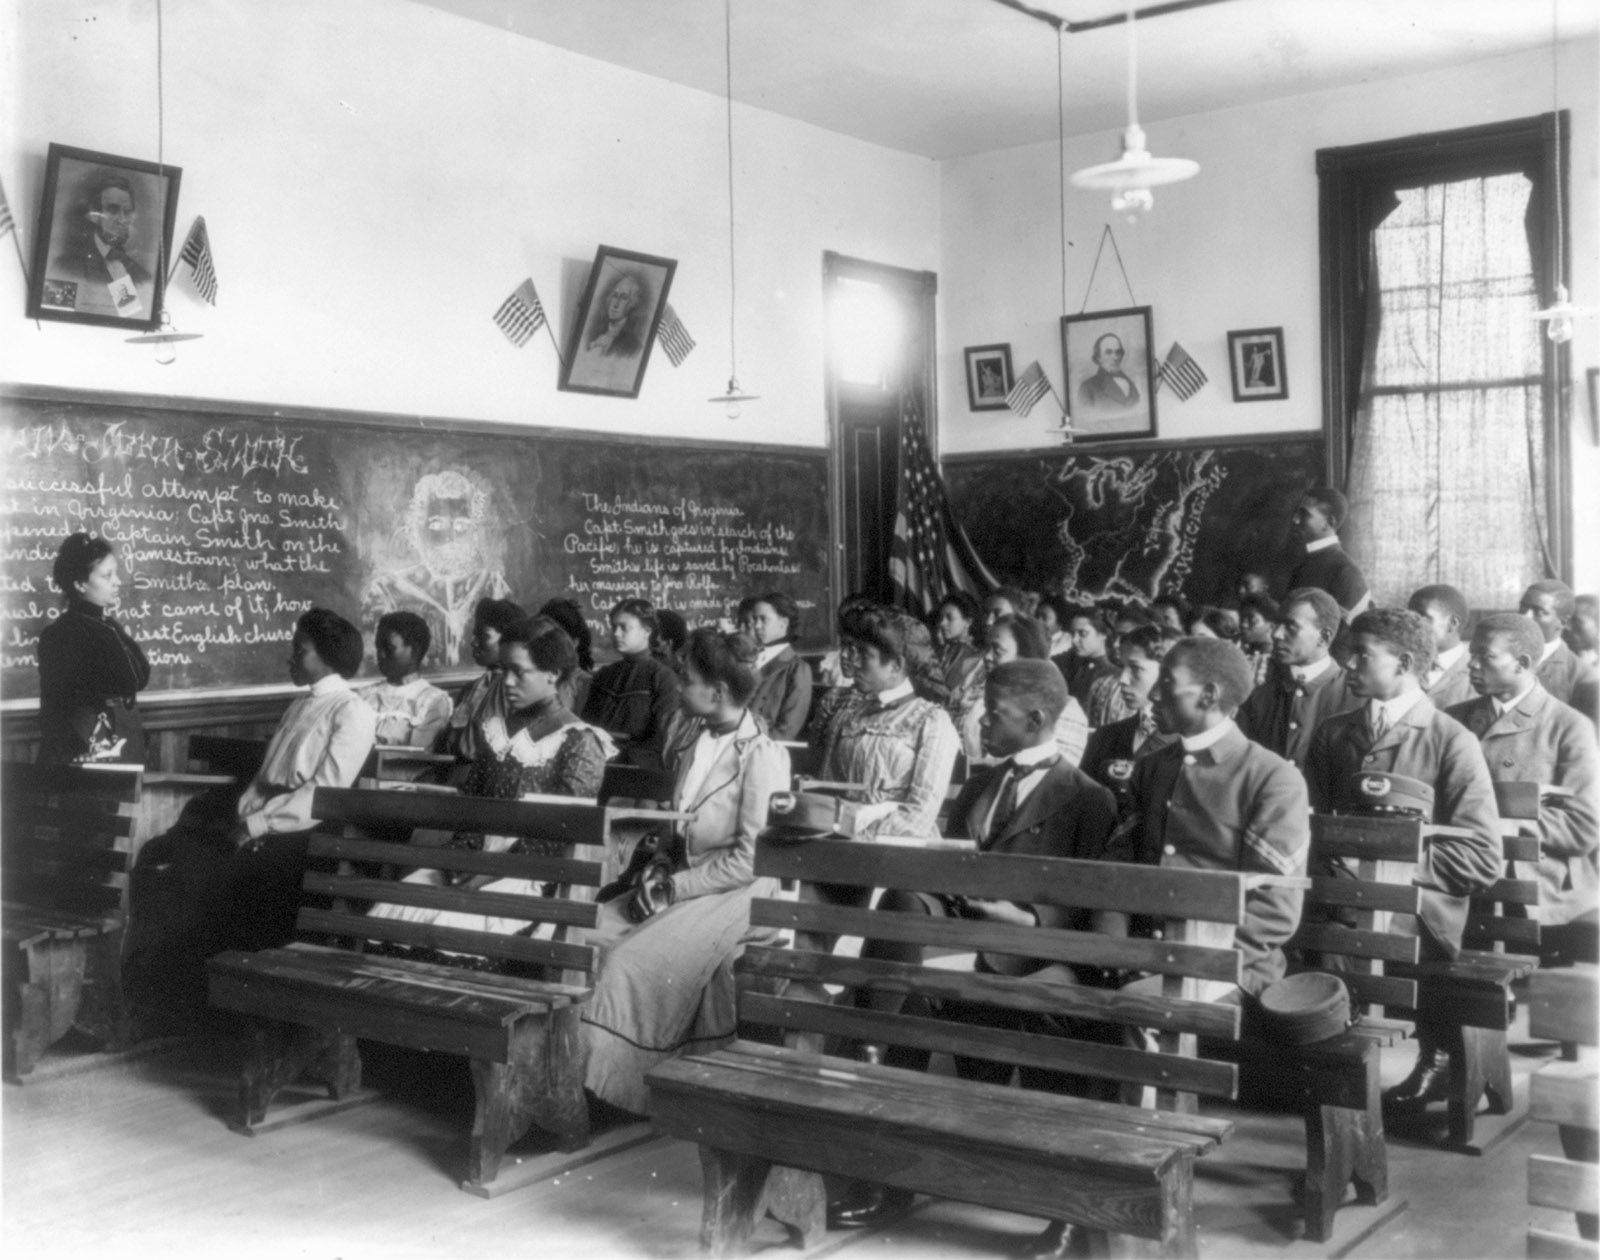 A history class at the Tuskegee Institute, Tuskegee, Alabama, 1902